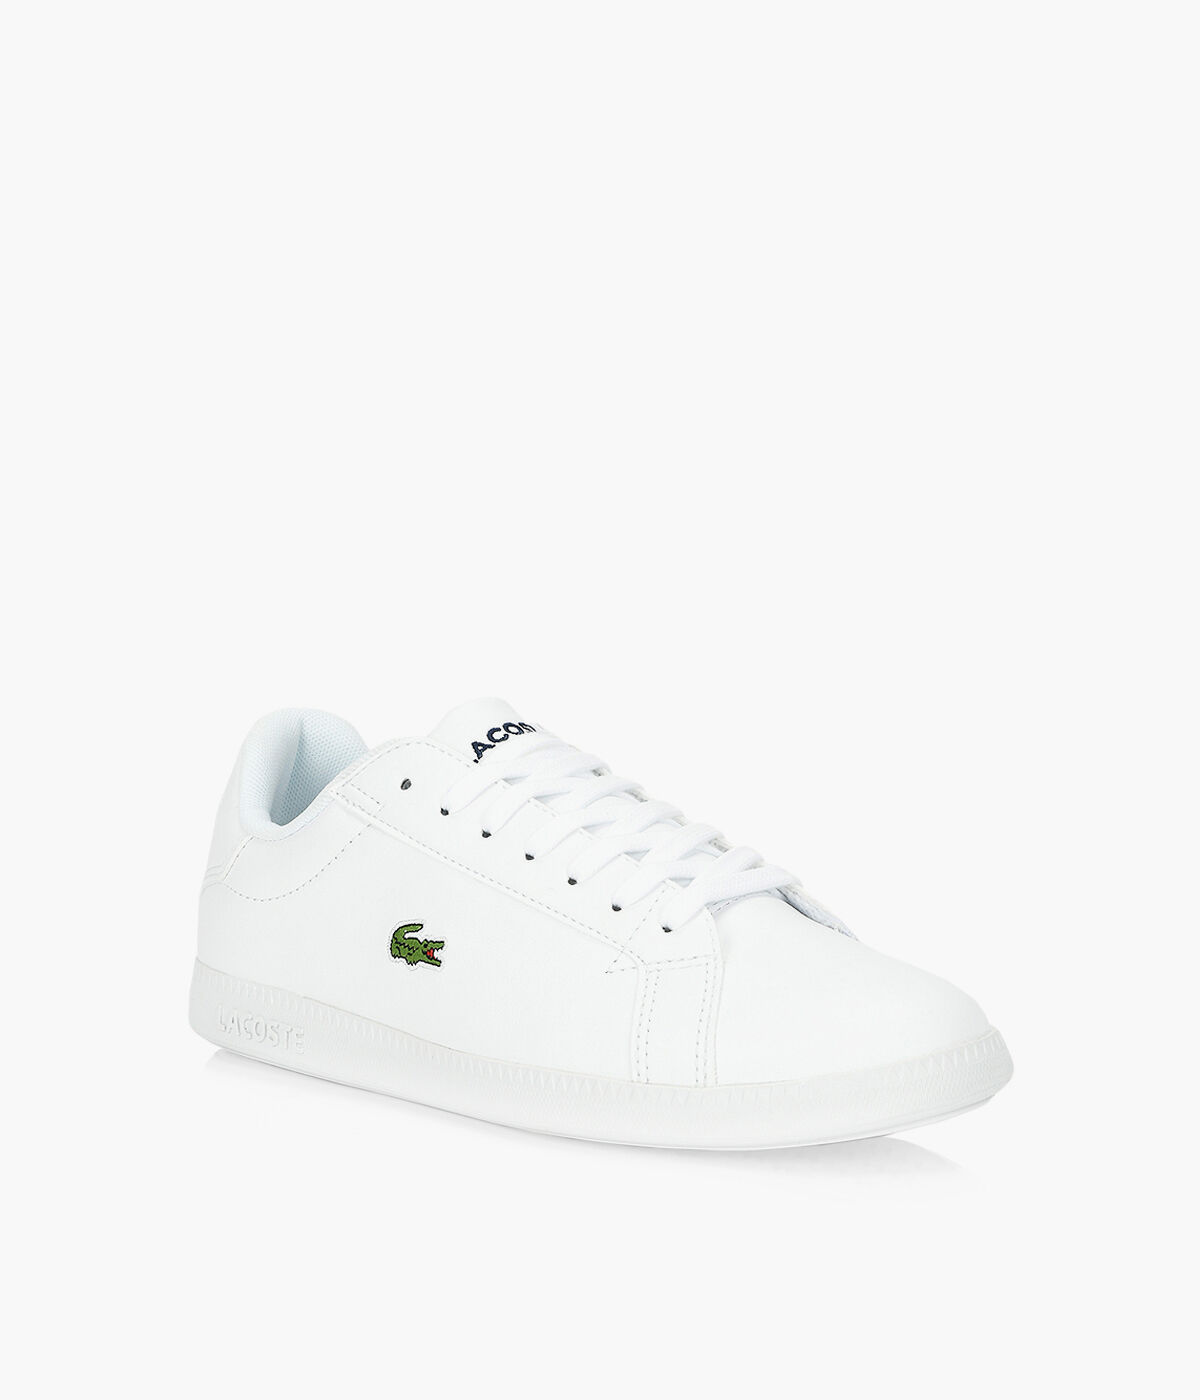 lacoste graduate bl1 leather trainers in white